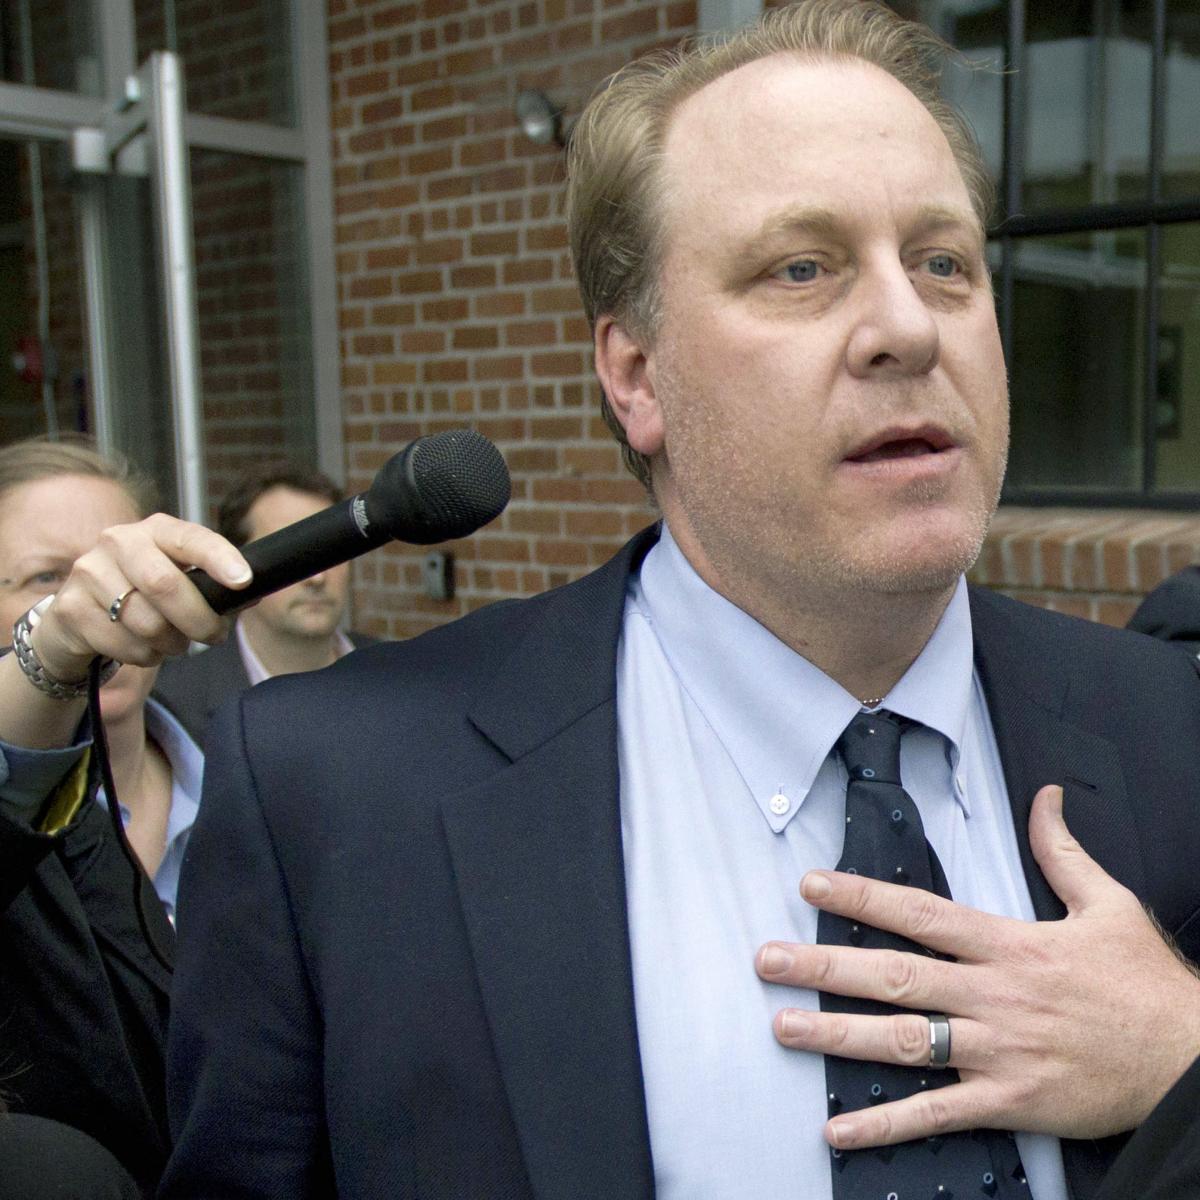 Curt Schilling and His Family Promise He's Not Transphobic